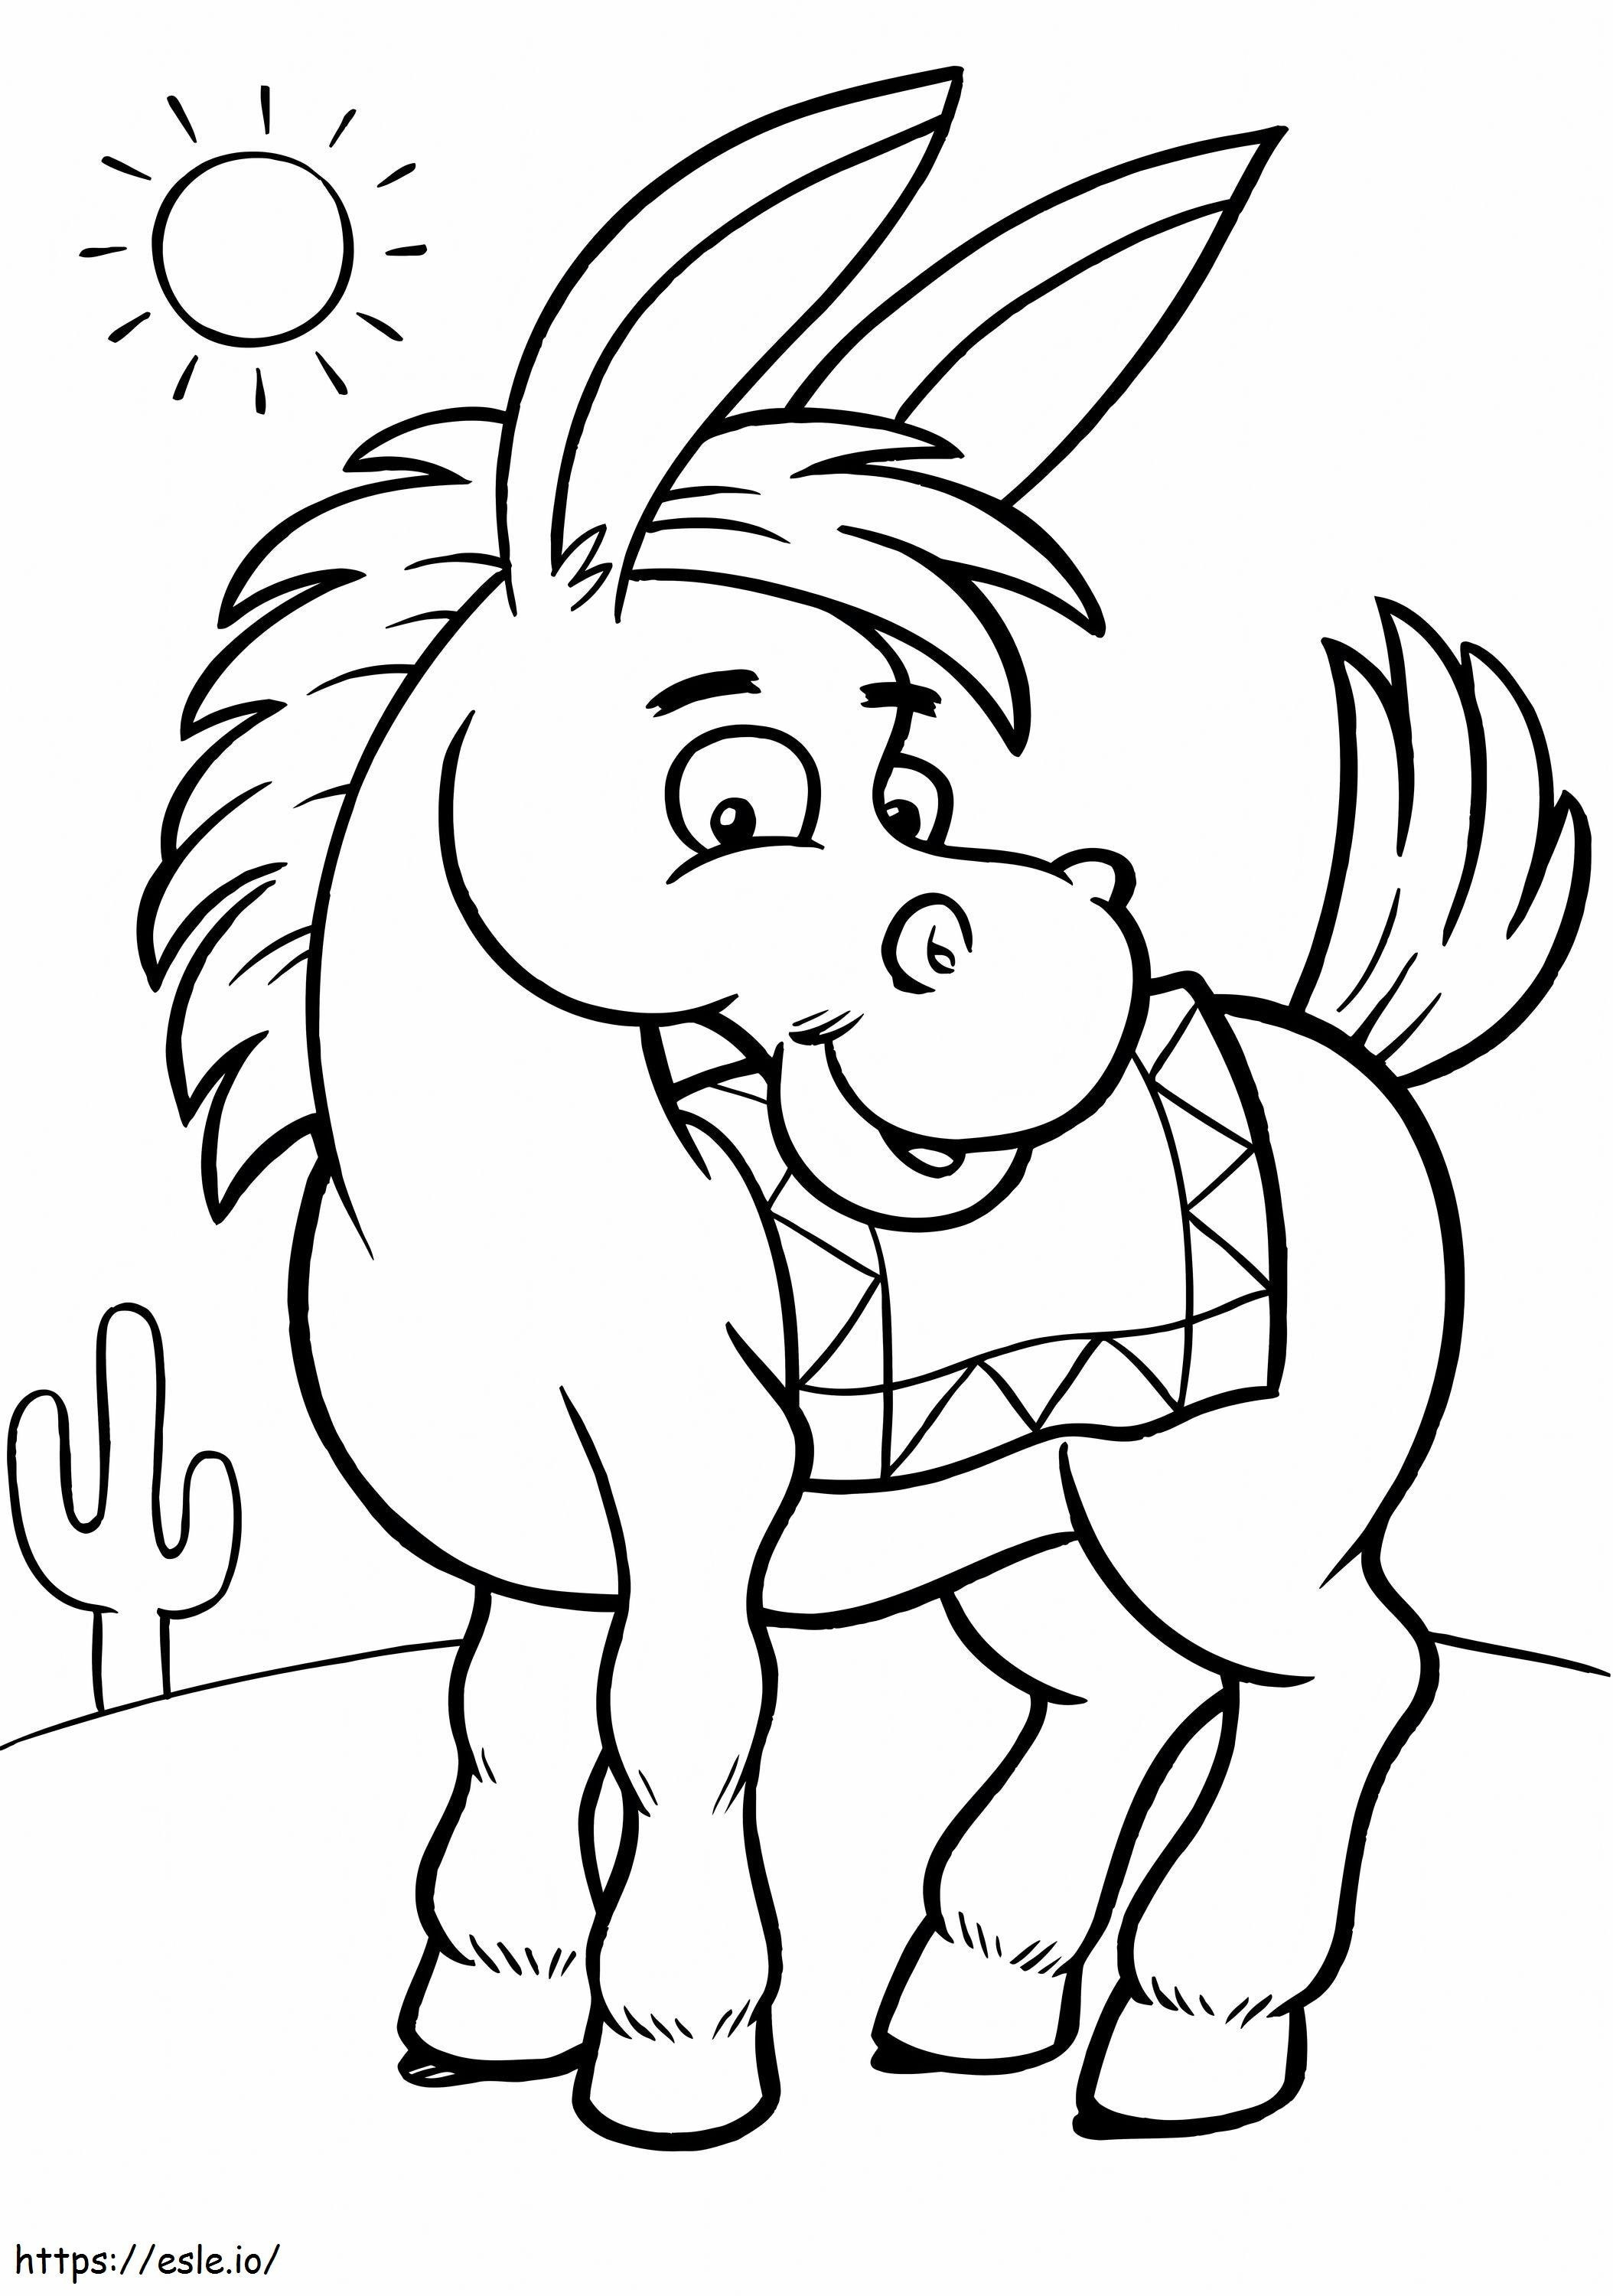 Smiling Cartoon Donkey Scaled coloring page